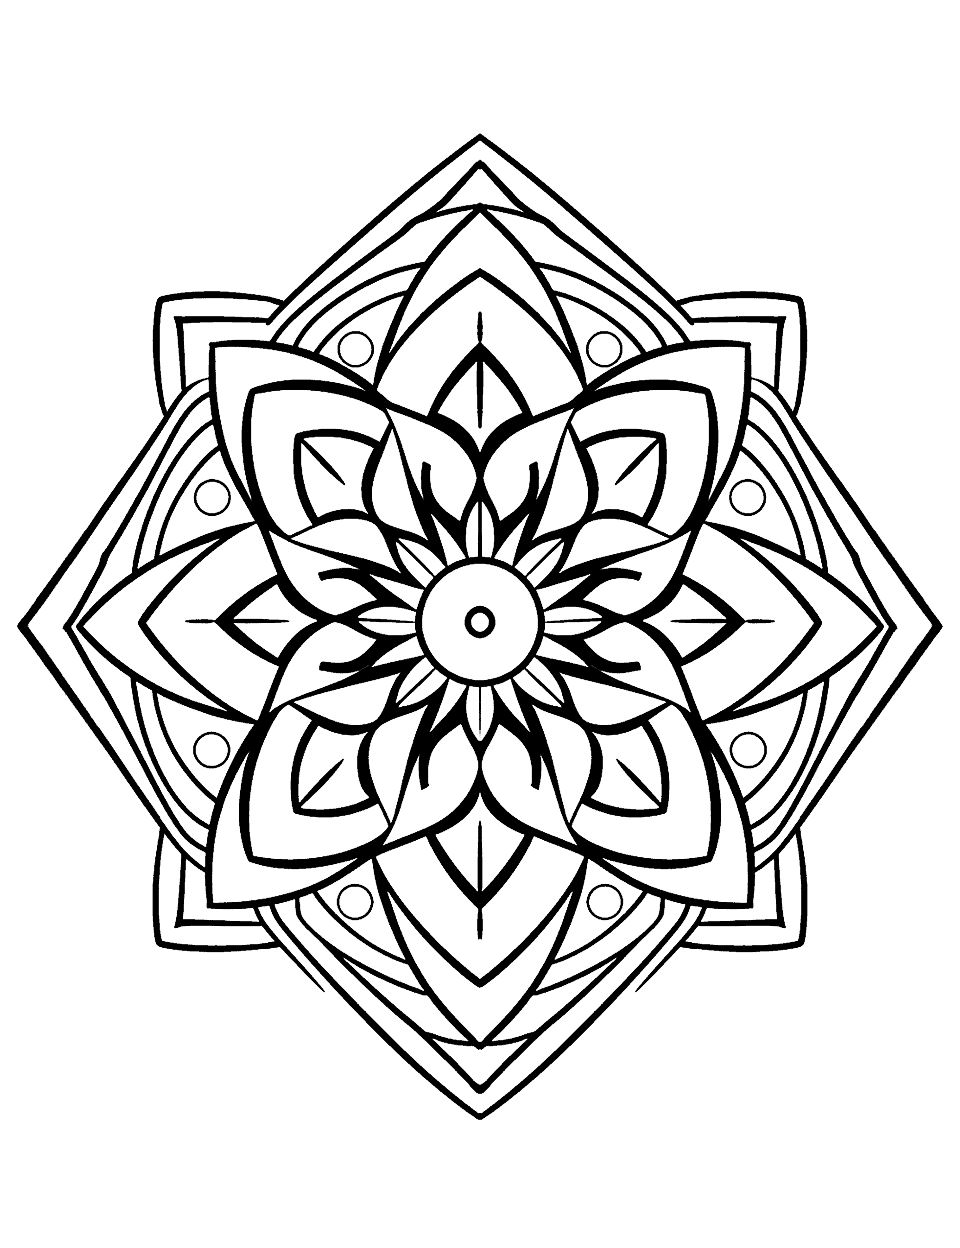 Snowflake Wonders Mandala Coloring Page - A beautiful, detailed mandala inspired by the intricate designs of snowflakes, perfect for winter-themed coloring.